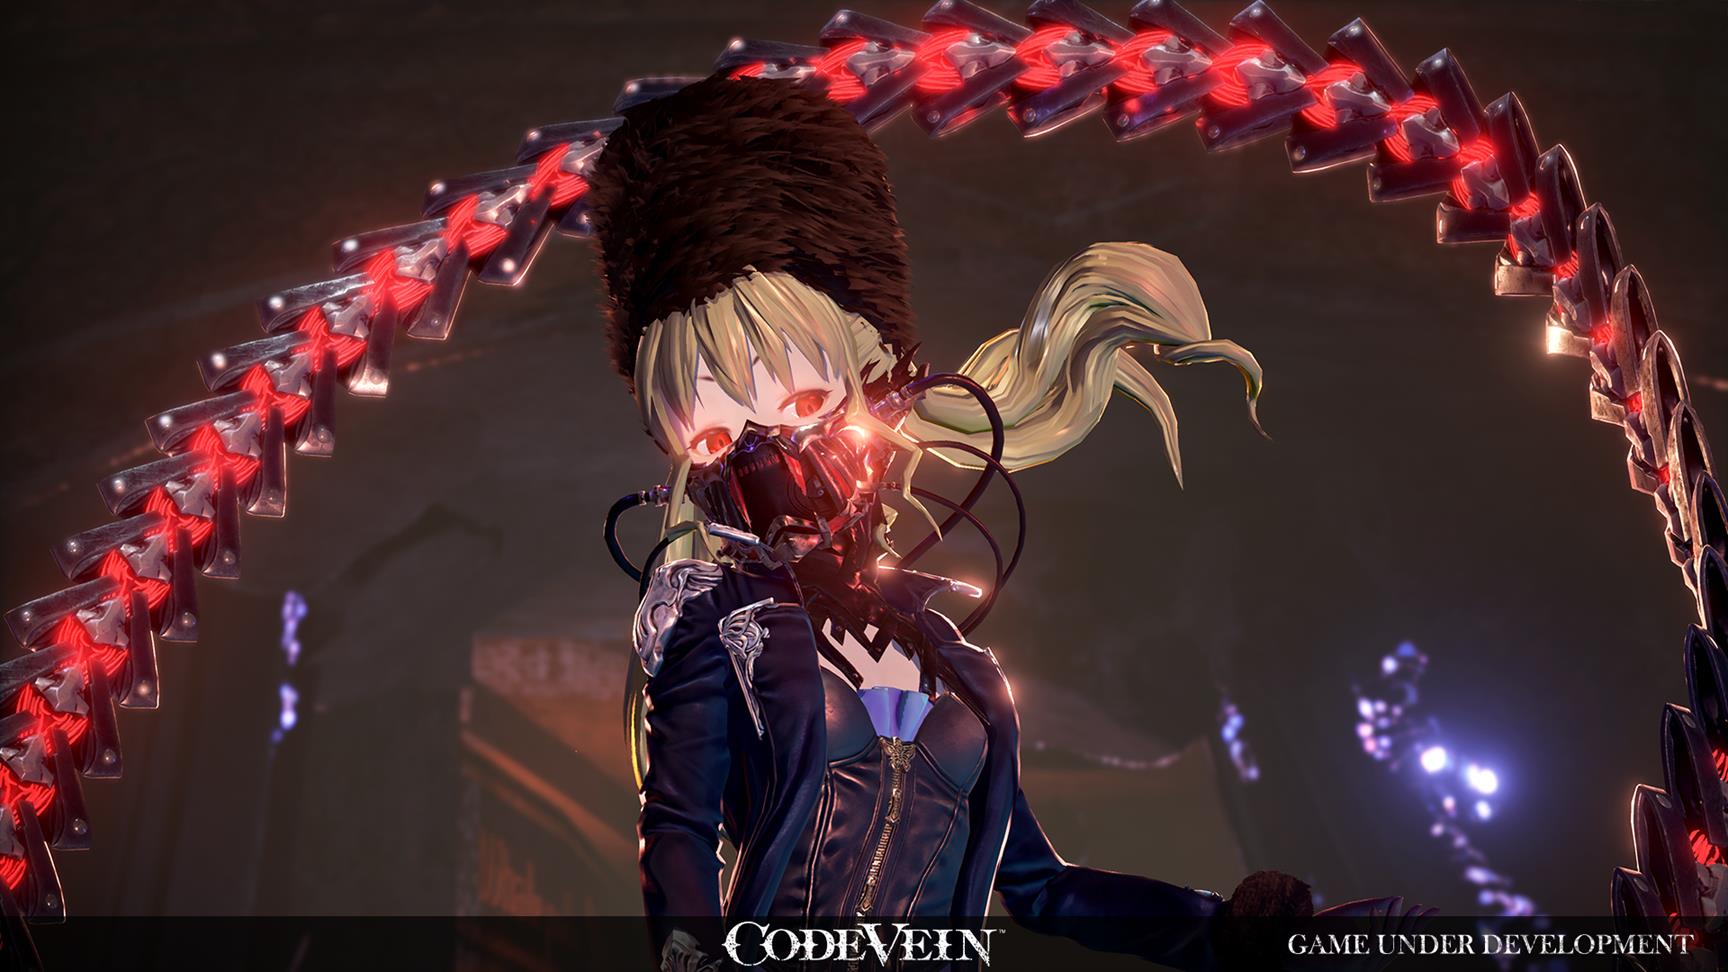 Image for News from Japan: Code Vein multiplayer details, new characters revealed, more